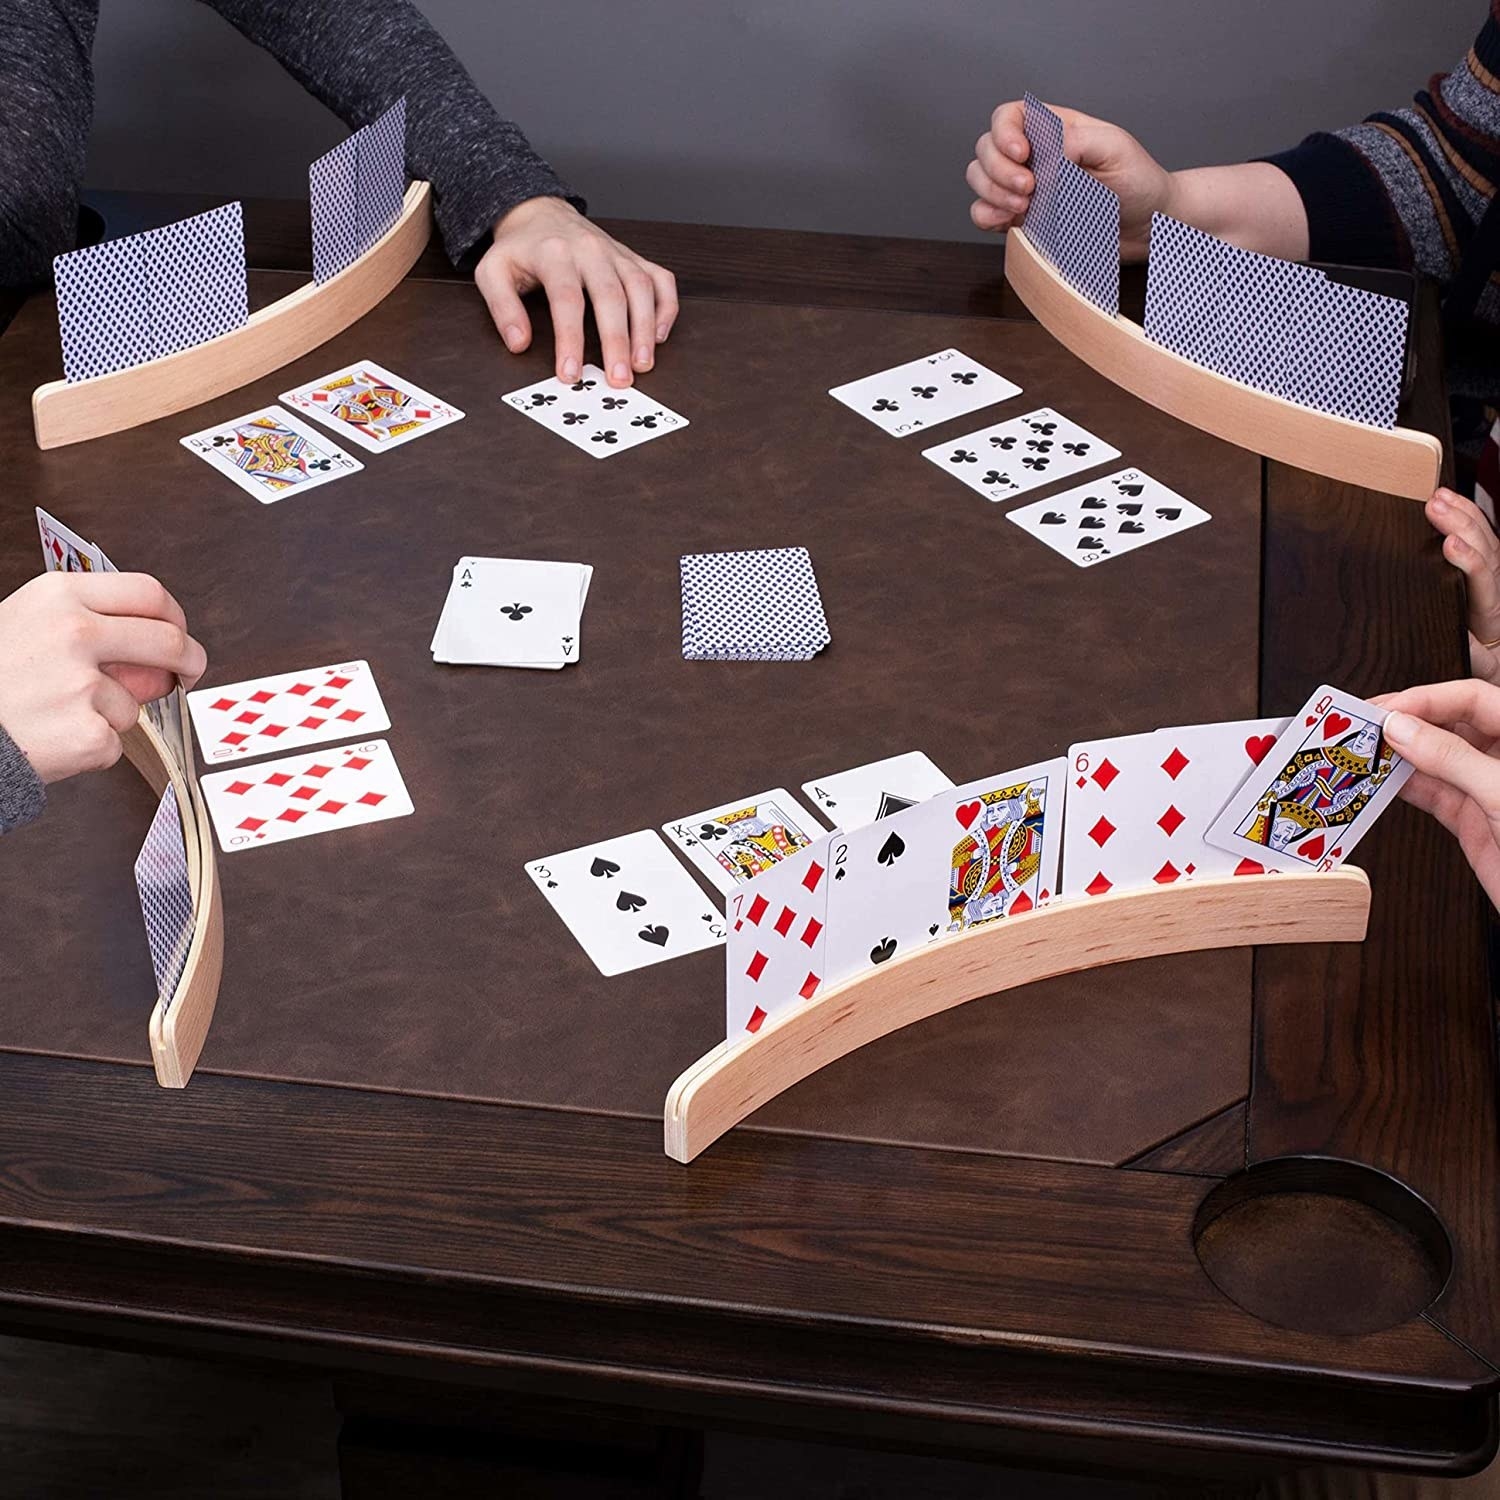 Four people using the card holders at a table